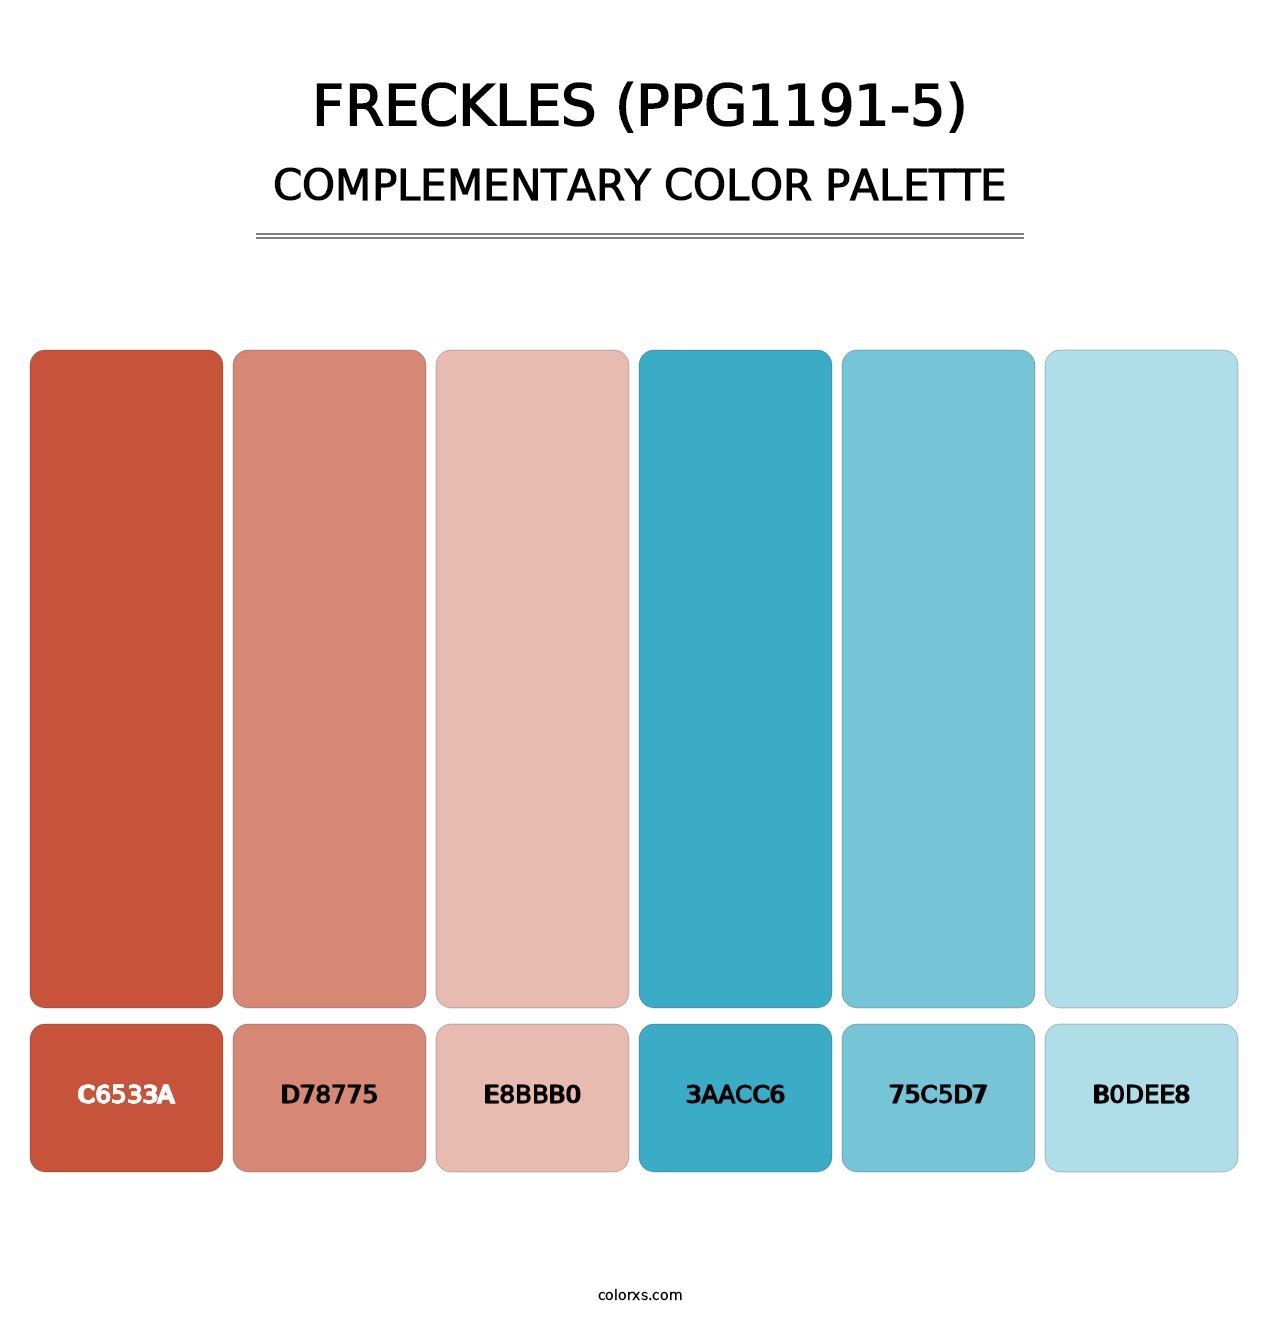 Freckles (PPG1191-5) - Complementary Color Palette